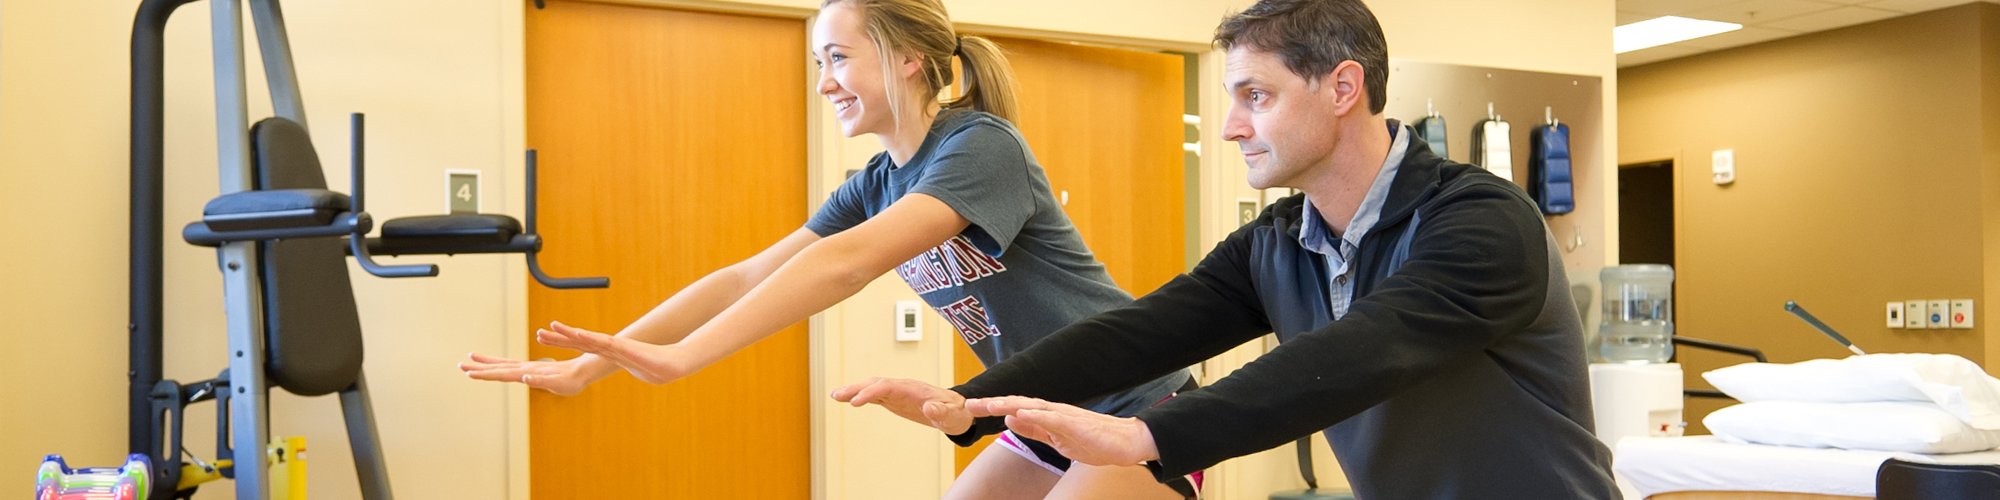 Physical Therapist Chris Allen works with Makenna, a high school athlete.